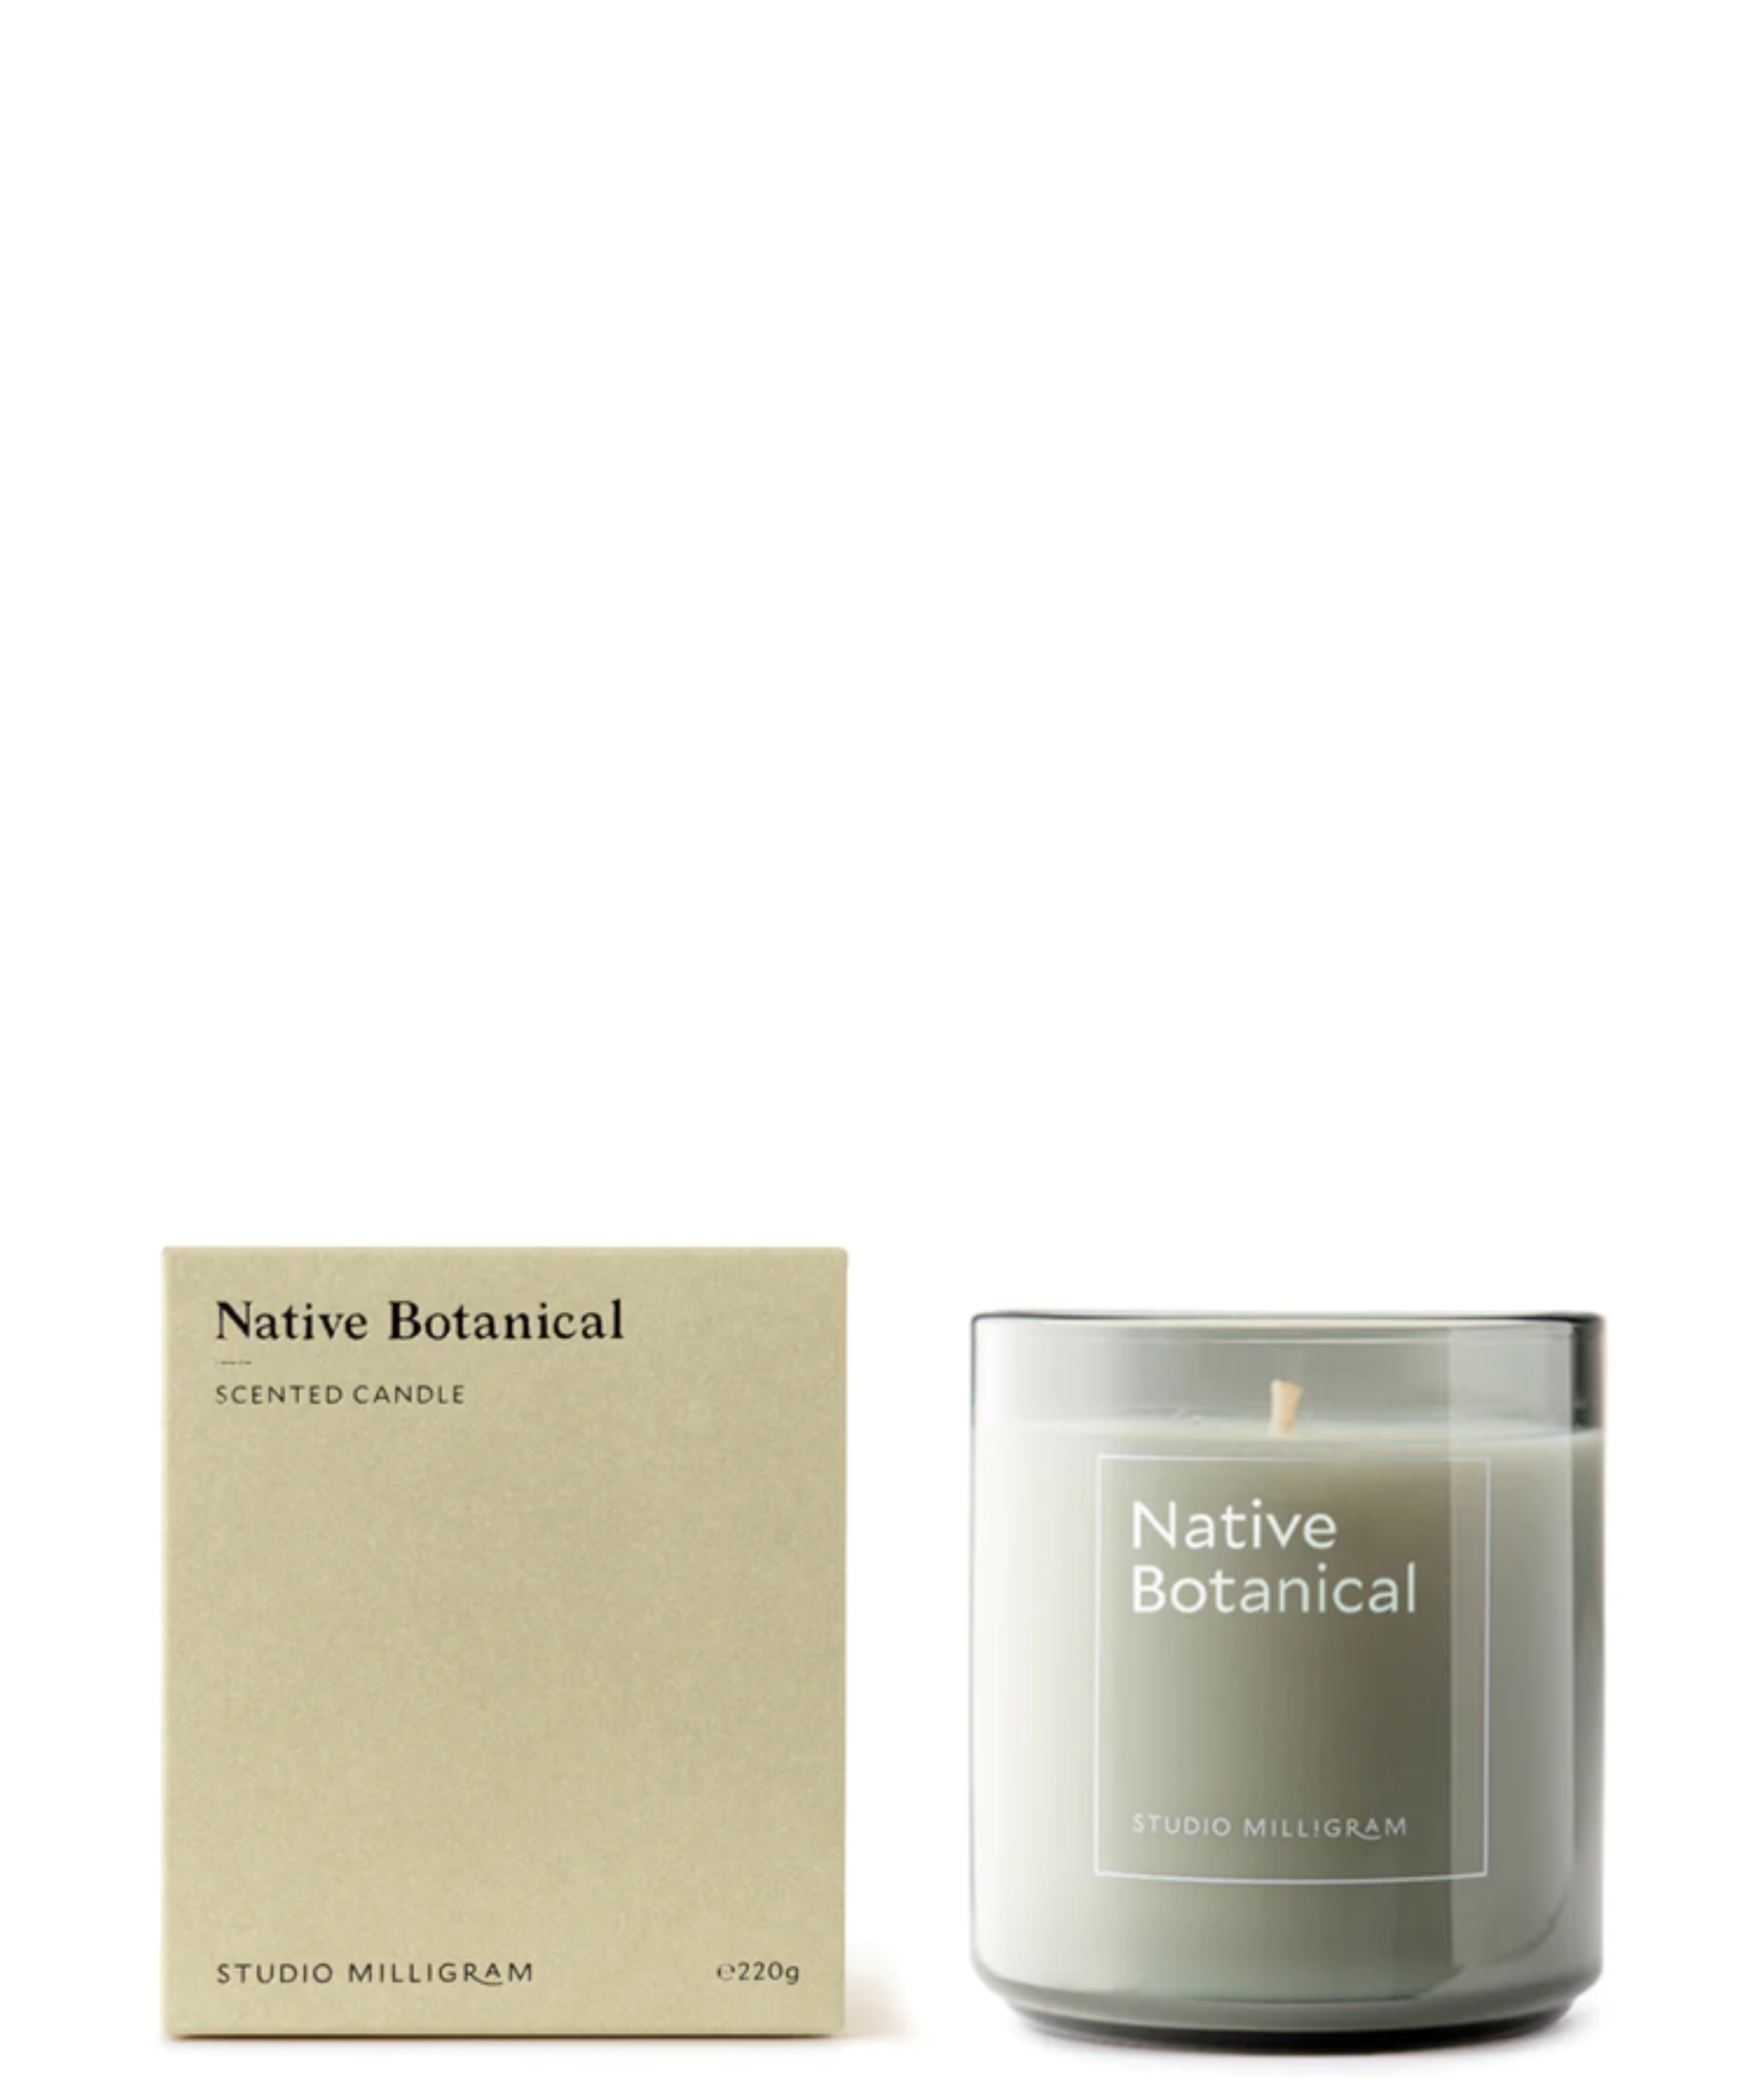 Scented Candle - Native Botanical